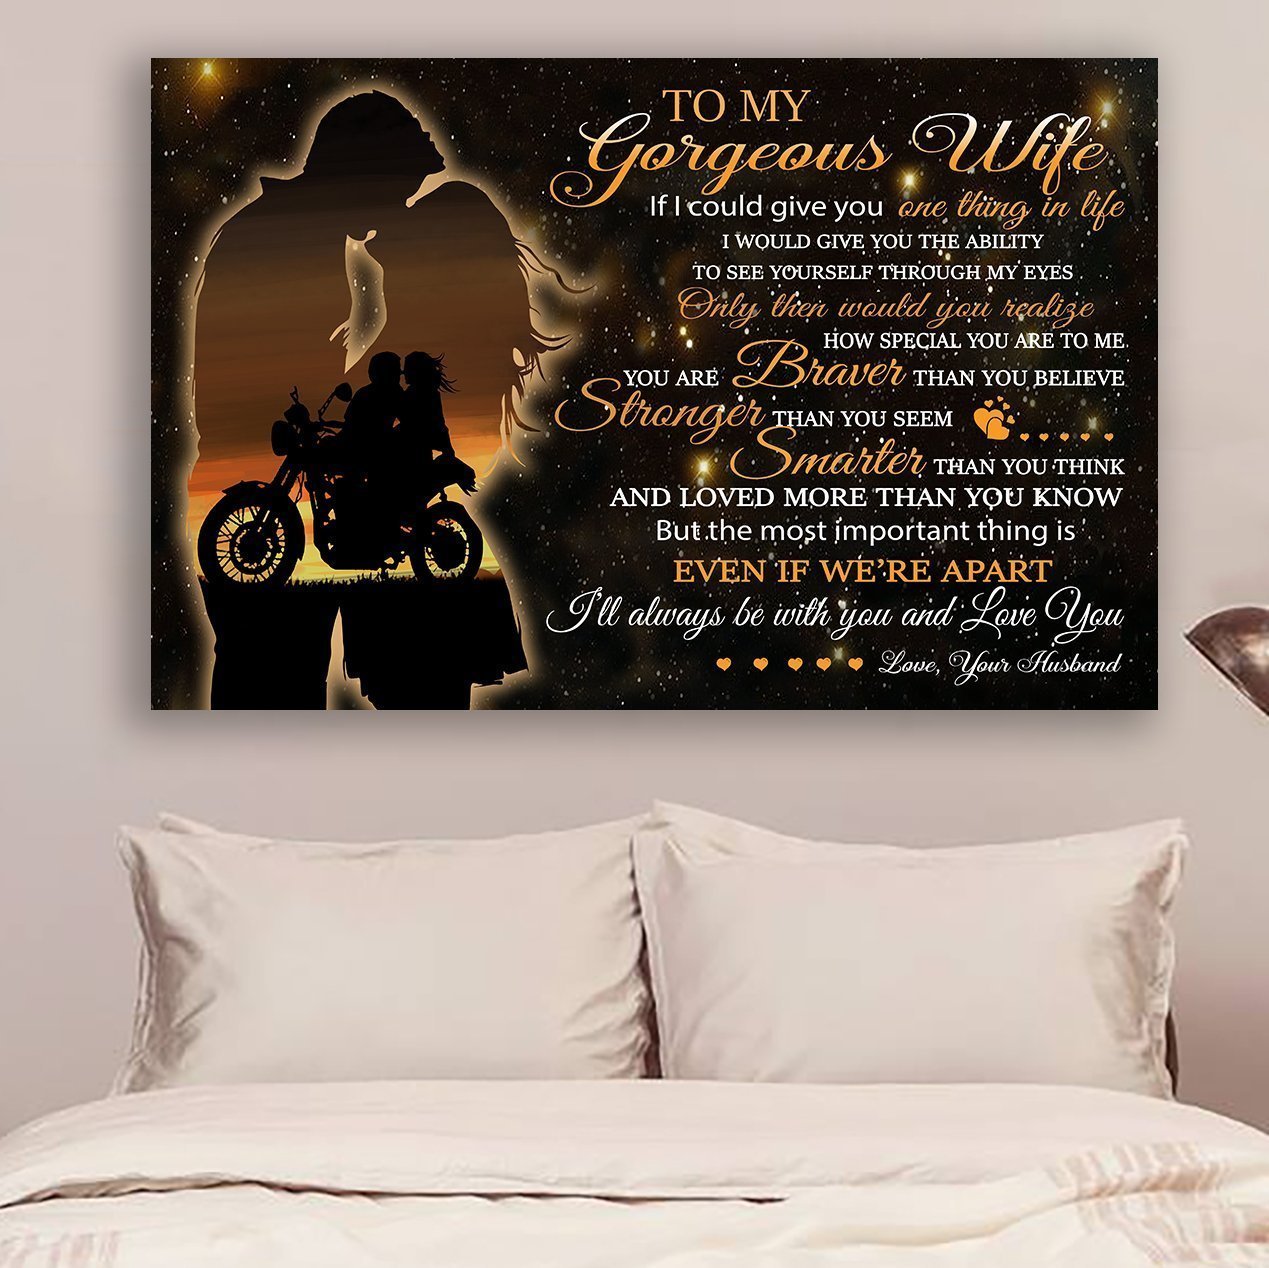 (LL33) BIKER Poster Canvas - HUSBAND to wife - you are BRAVER THAN YOU BELIEVE